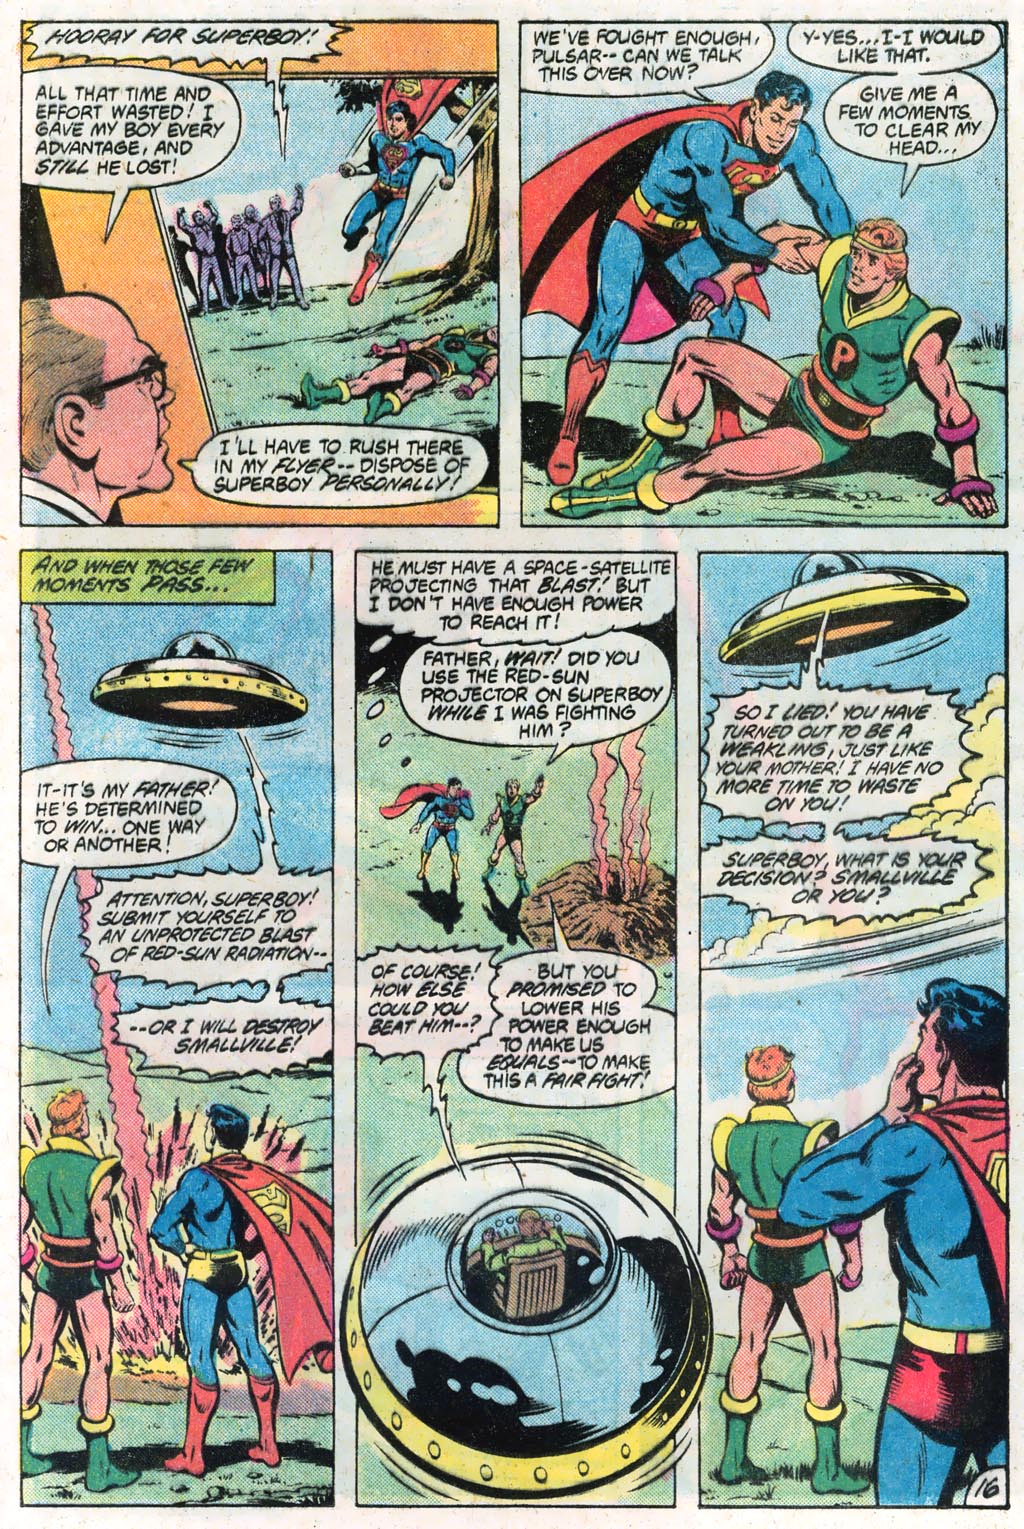 The New Adventures of Superboy 31 Page 20